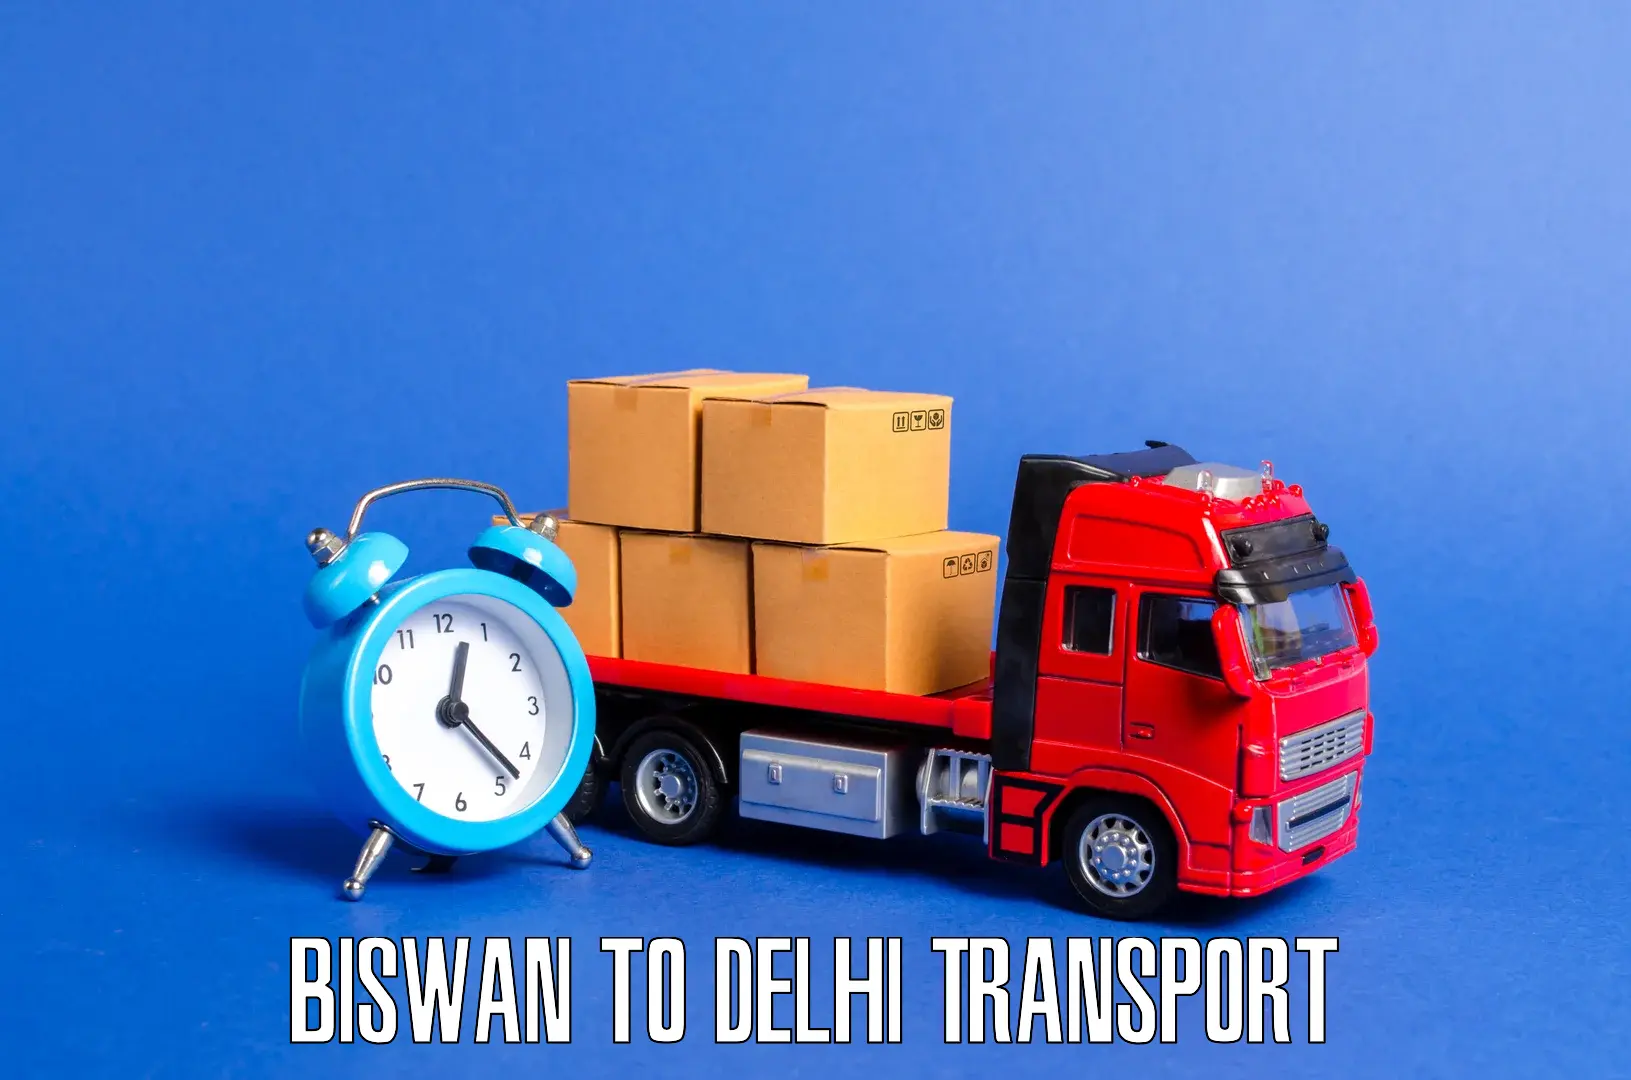 Nearest transport service Biswan to NCR